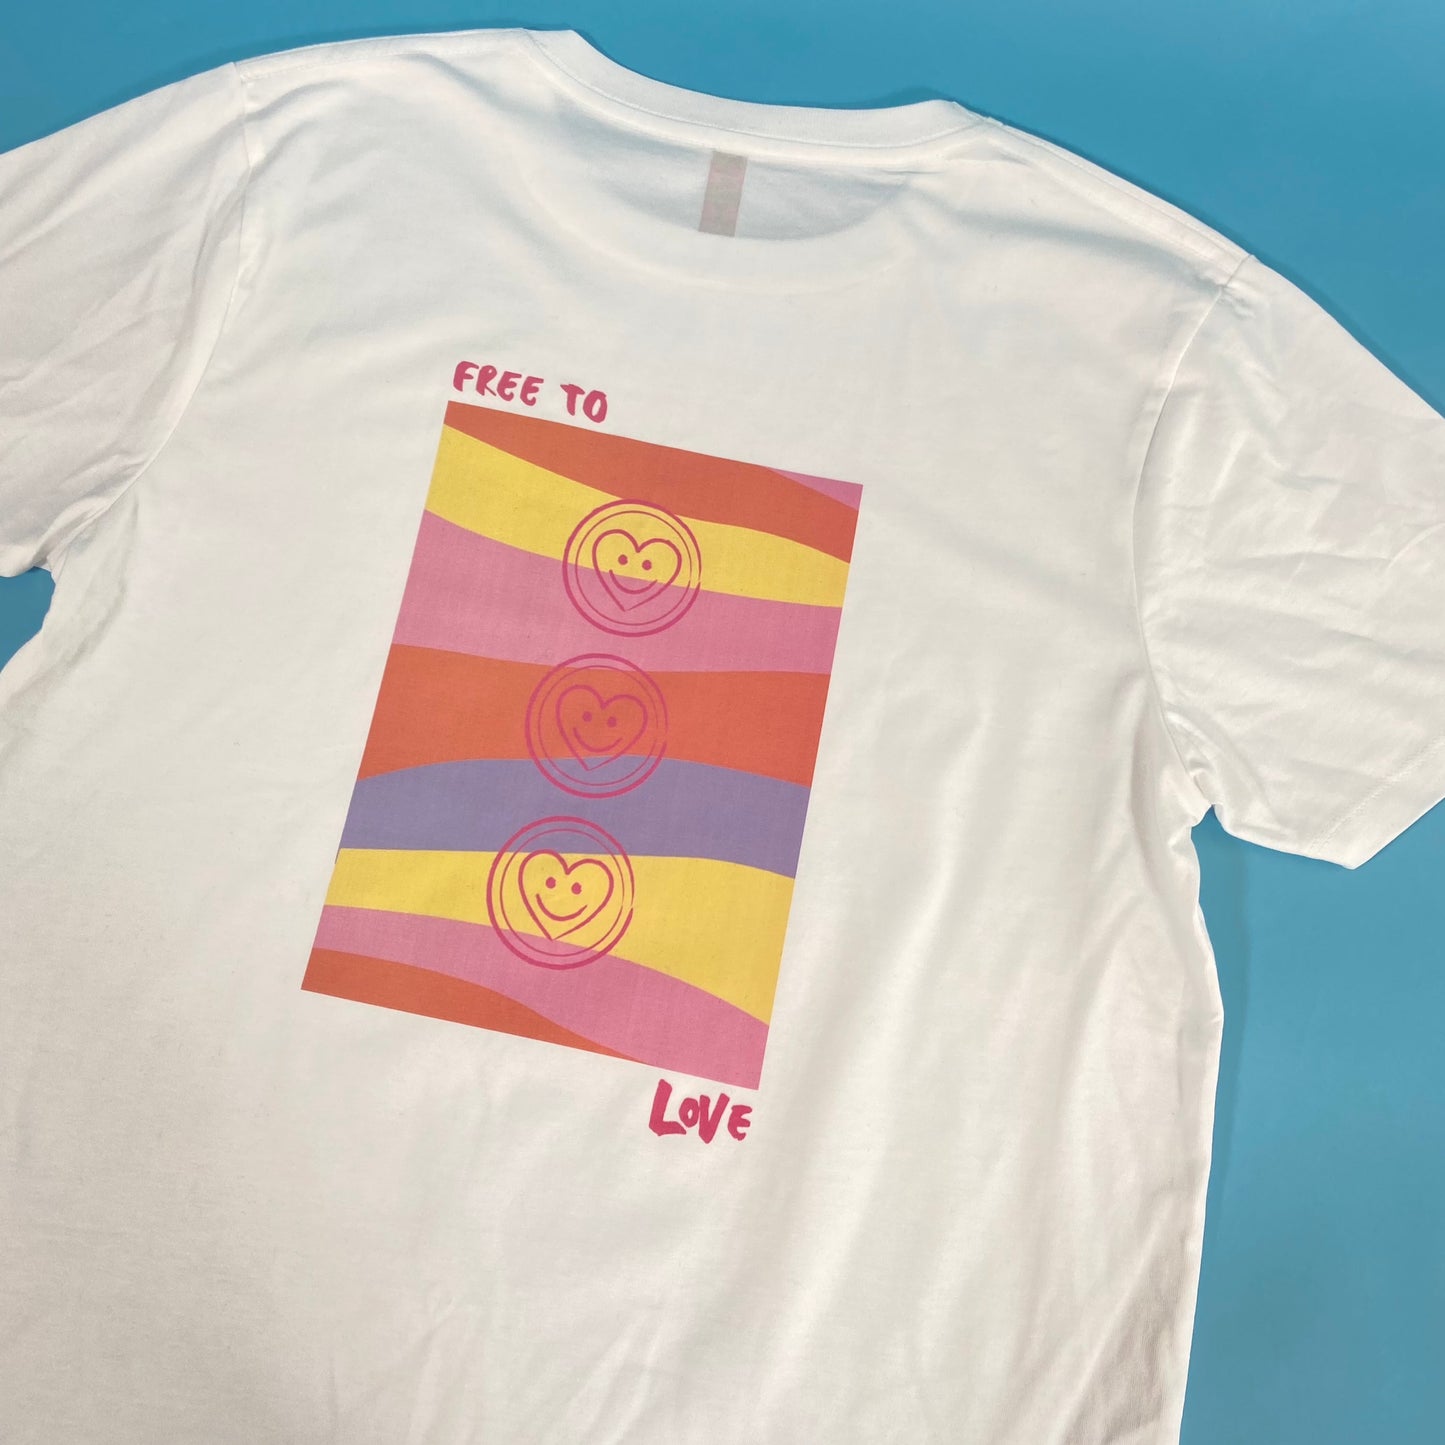 S Free to love - smiley heart T-Shirt SALE